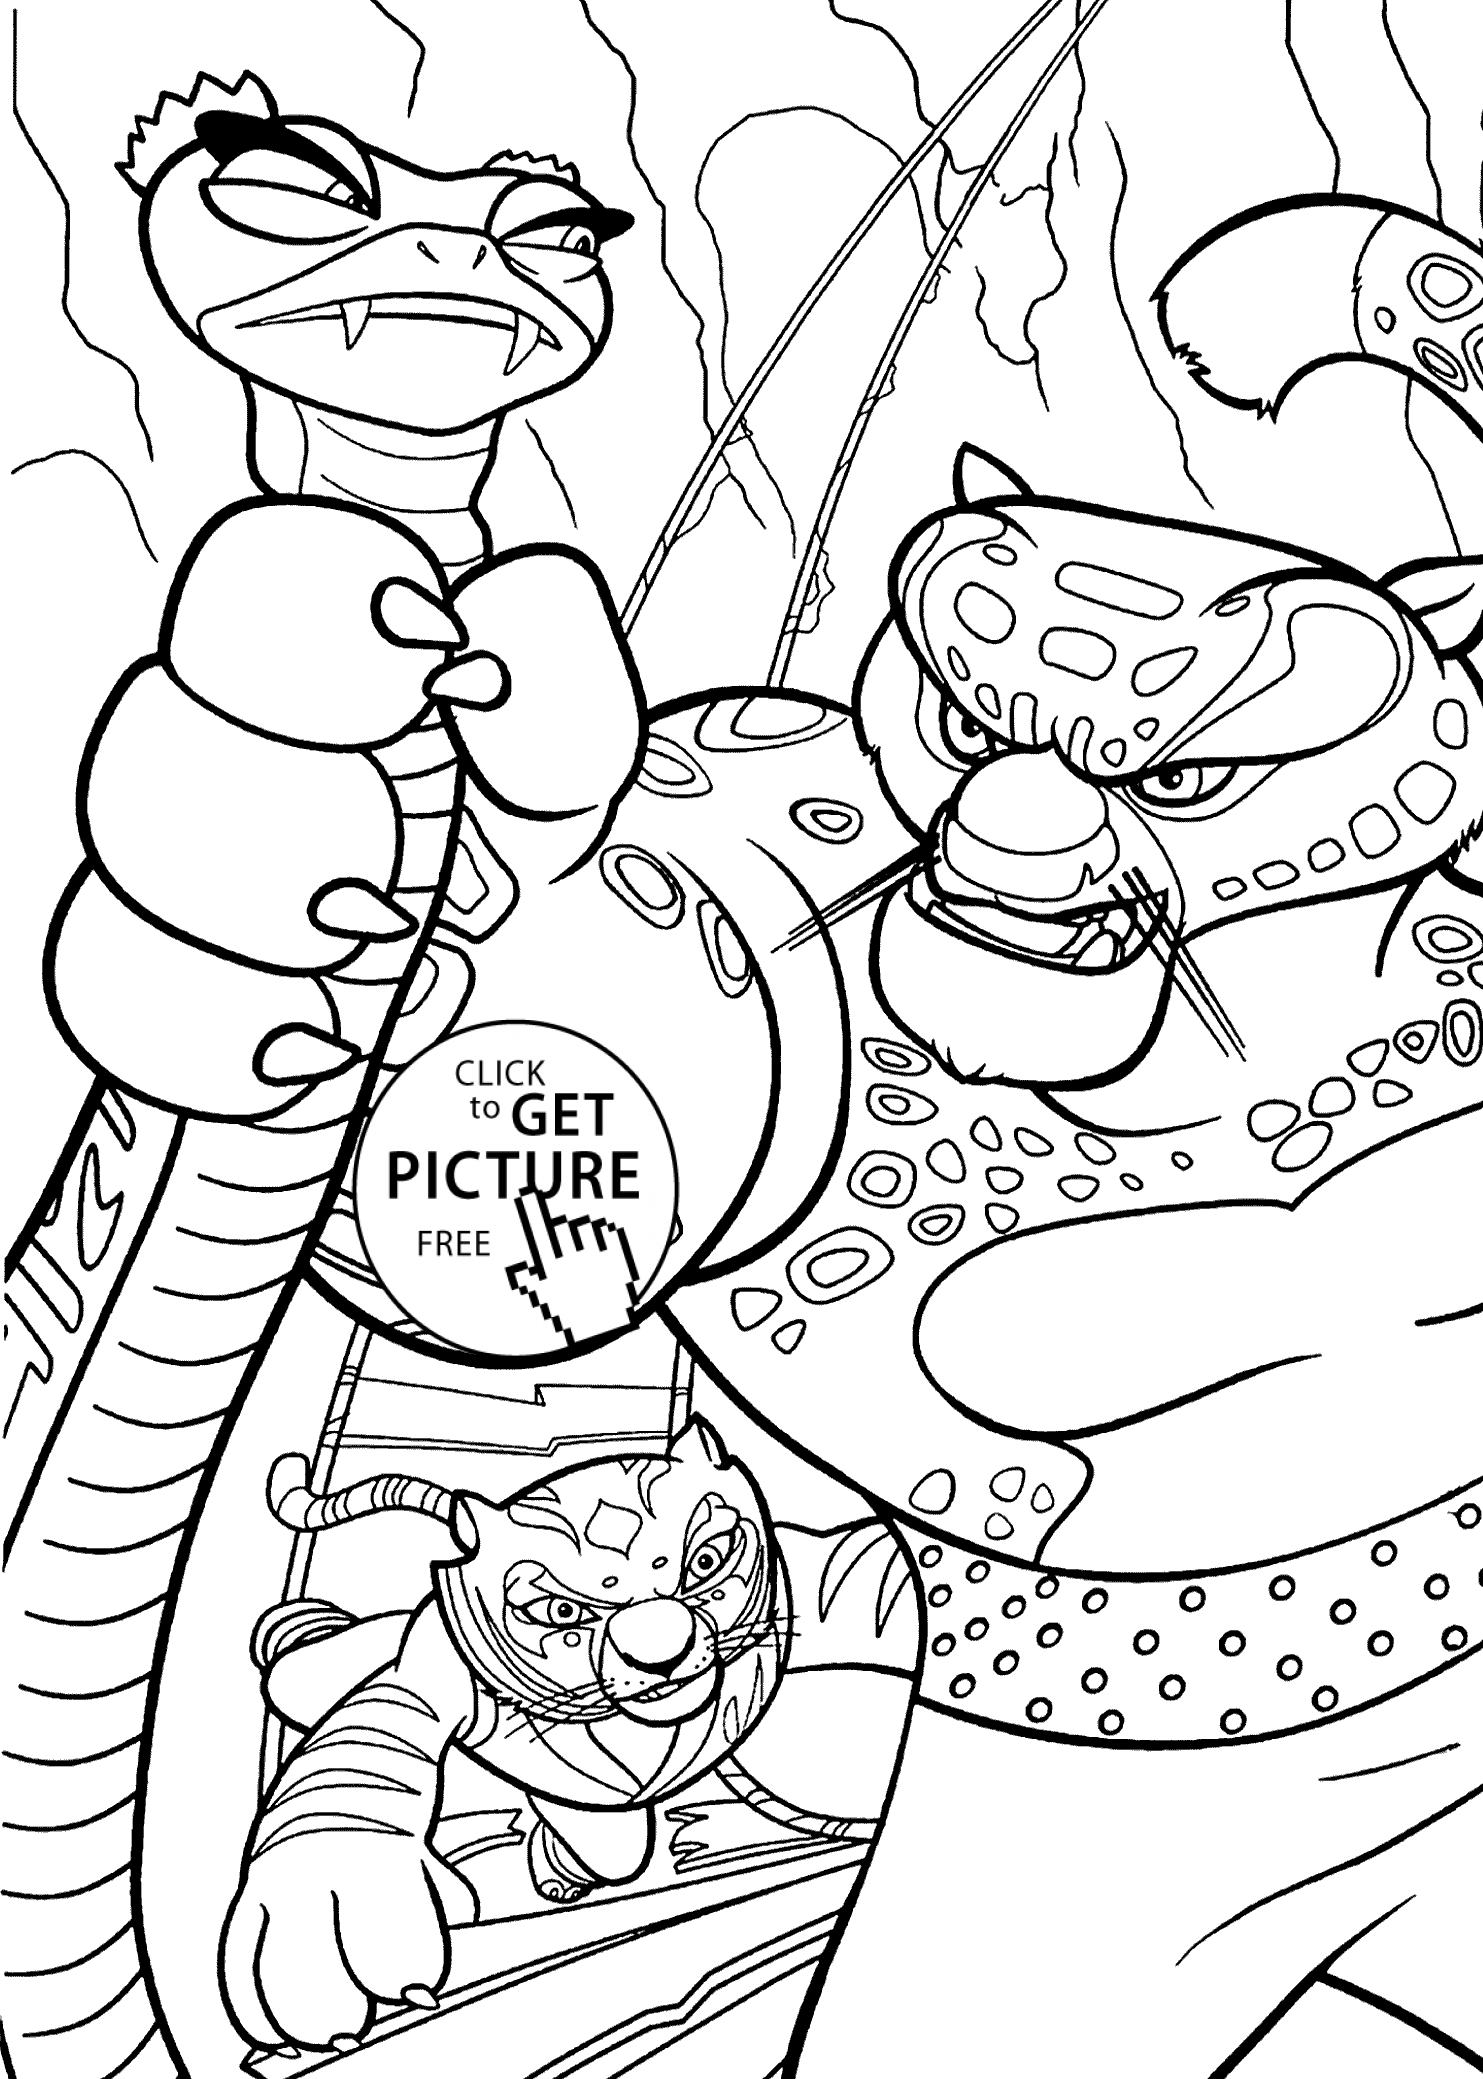 Tai Lung from Kung Fu Panda coloring pages for kids, printable free